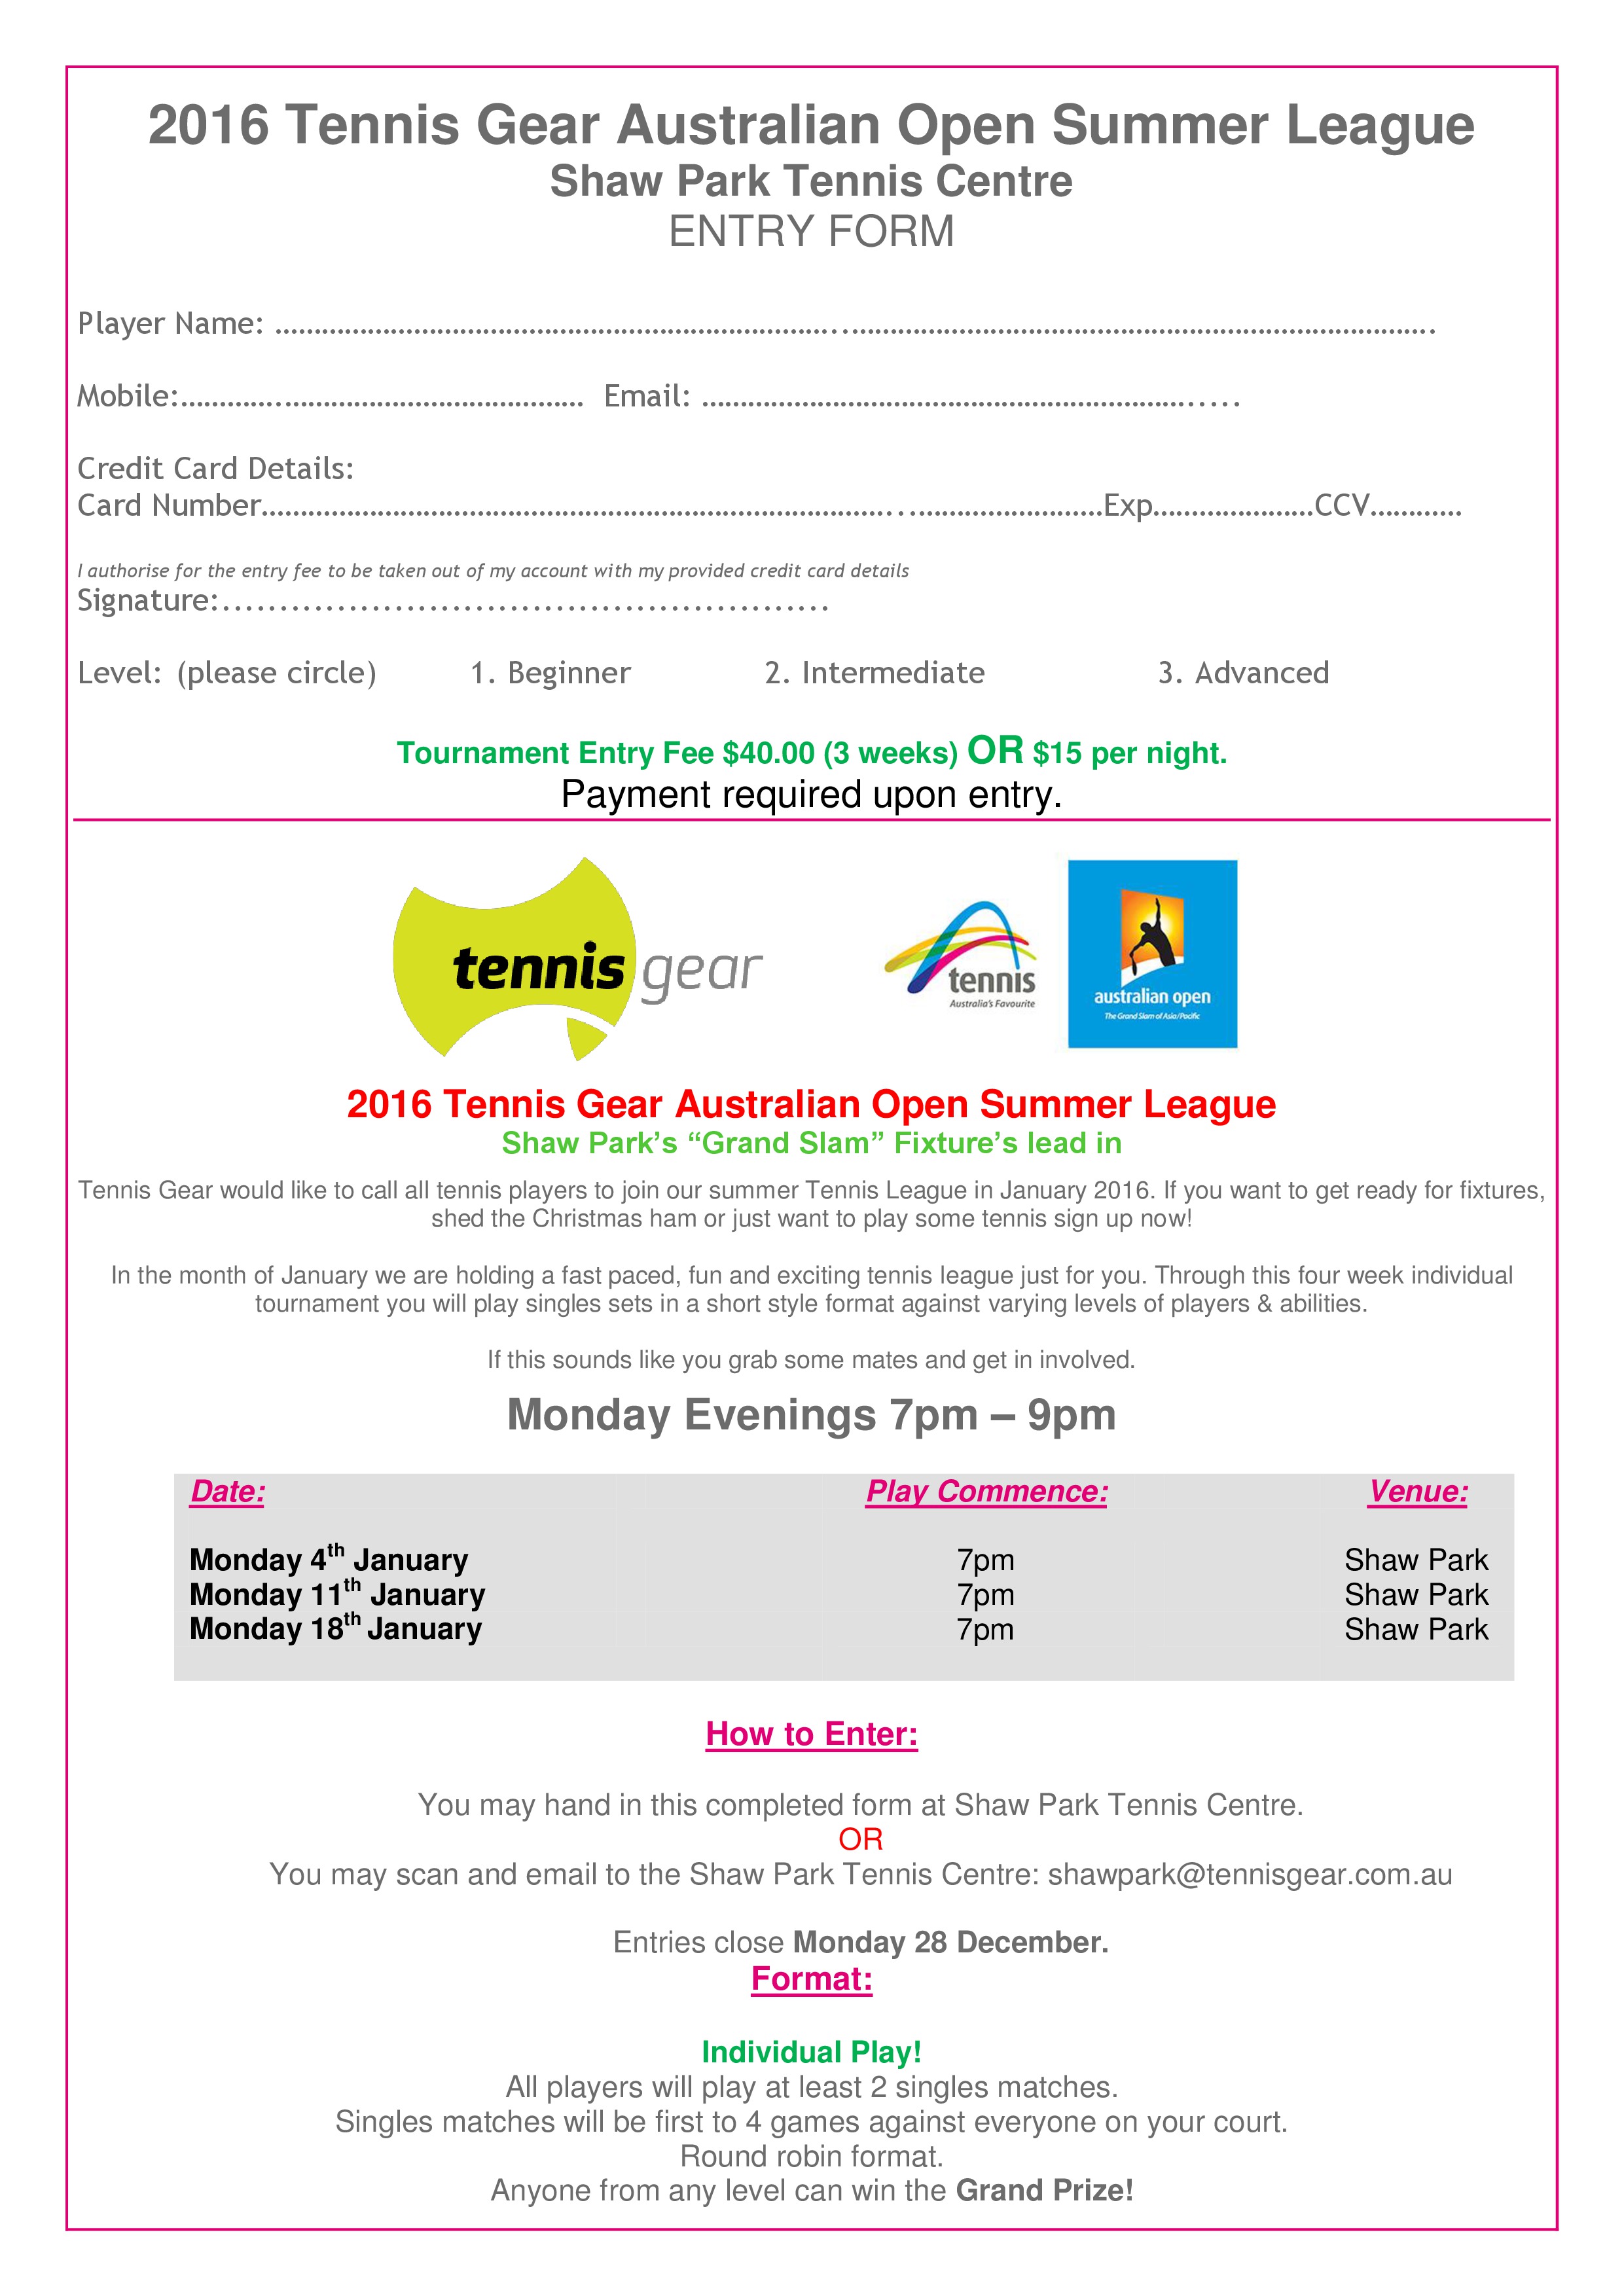 2016 Tennis Gear Summer Competition